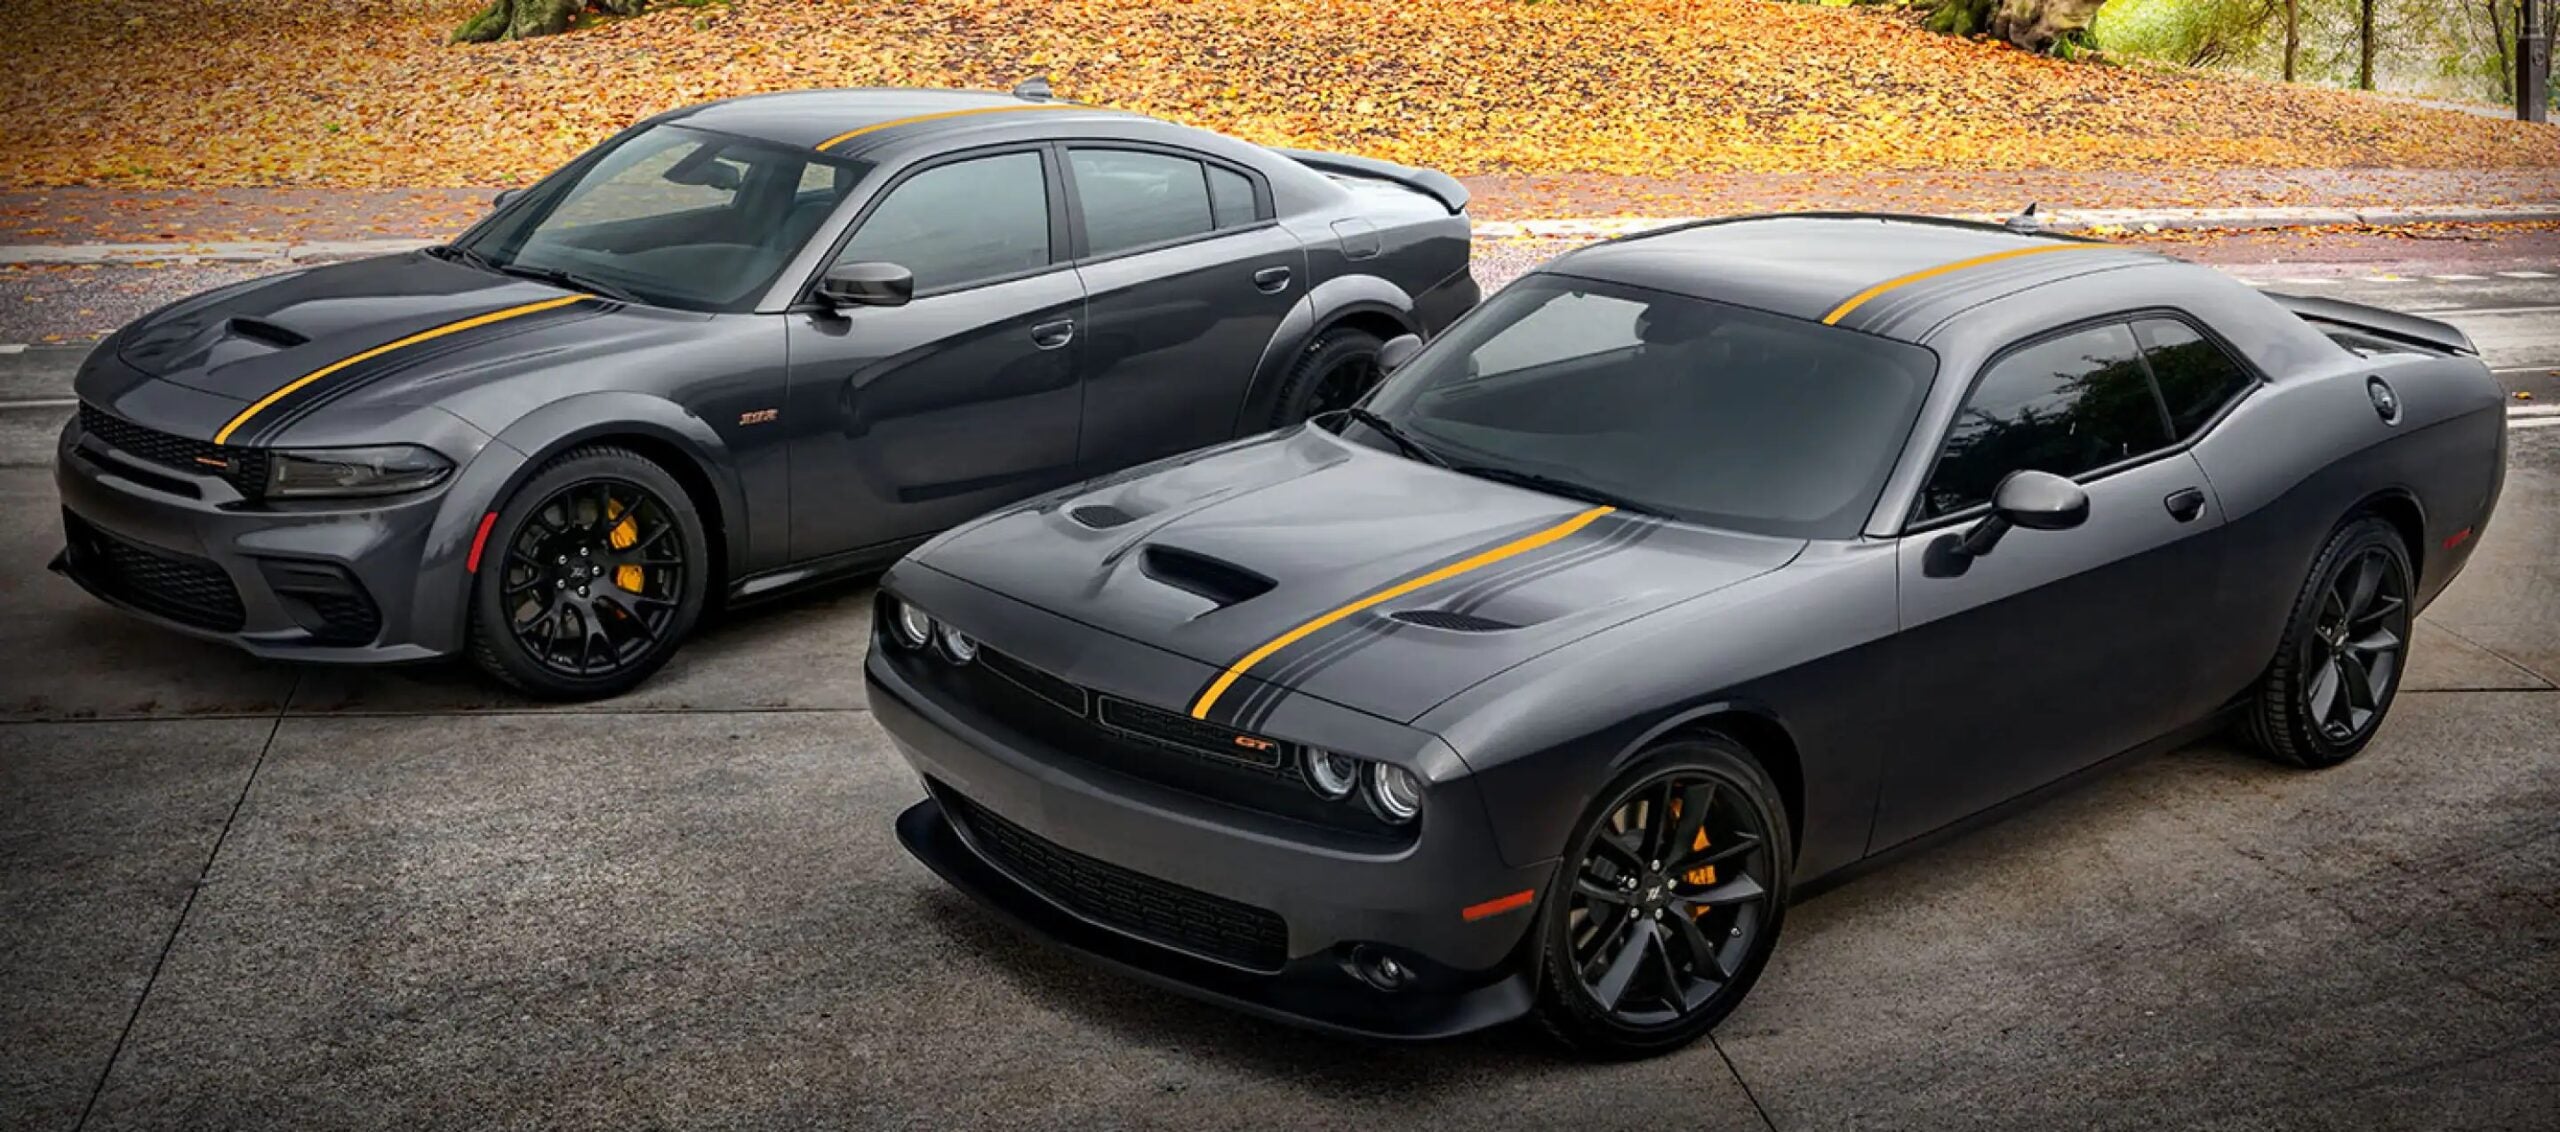 The Dodge Challenger and Charger are dead. Here are the best rides to blow your paycheck on instead